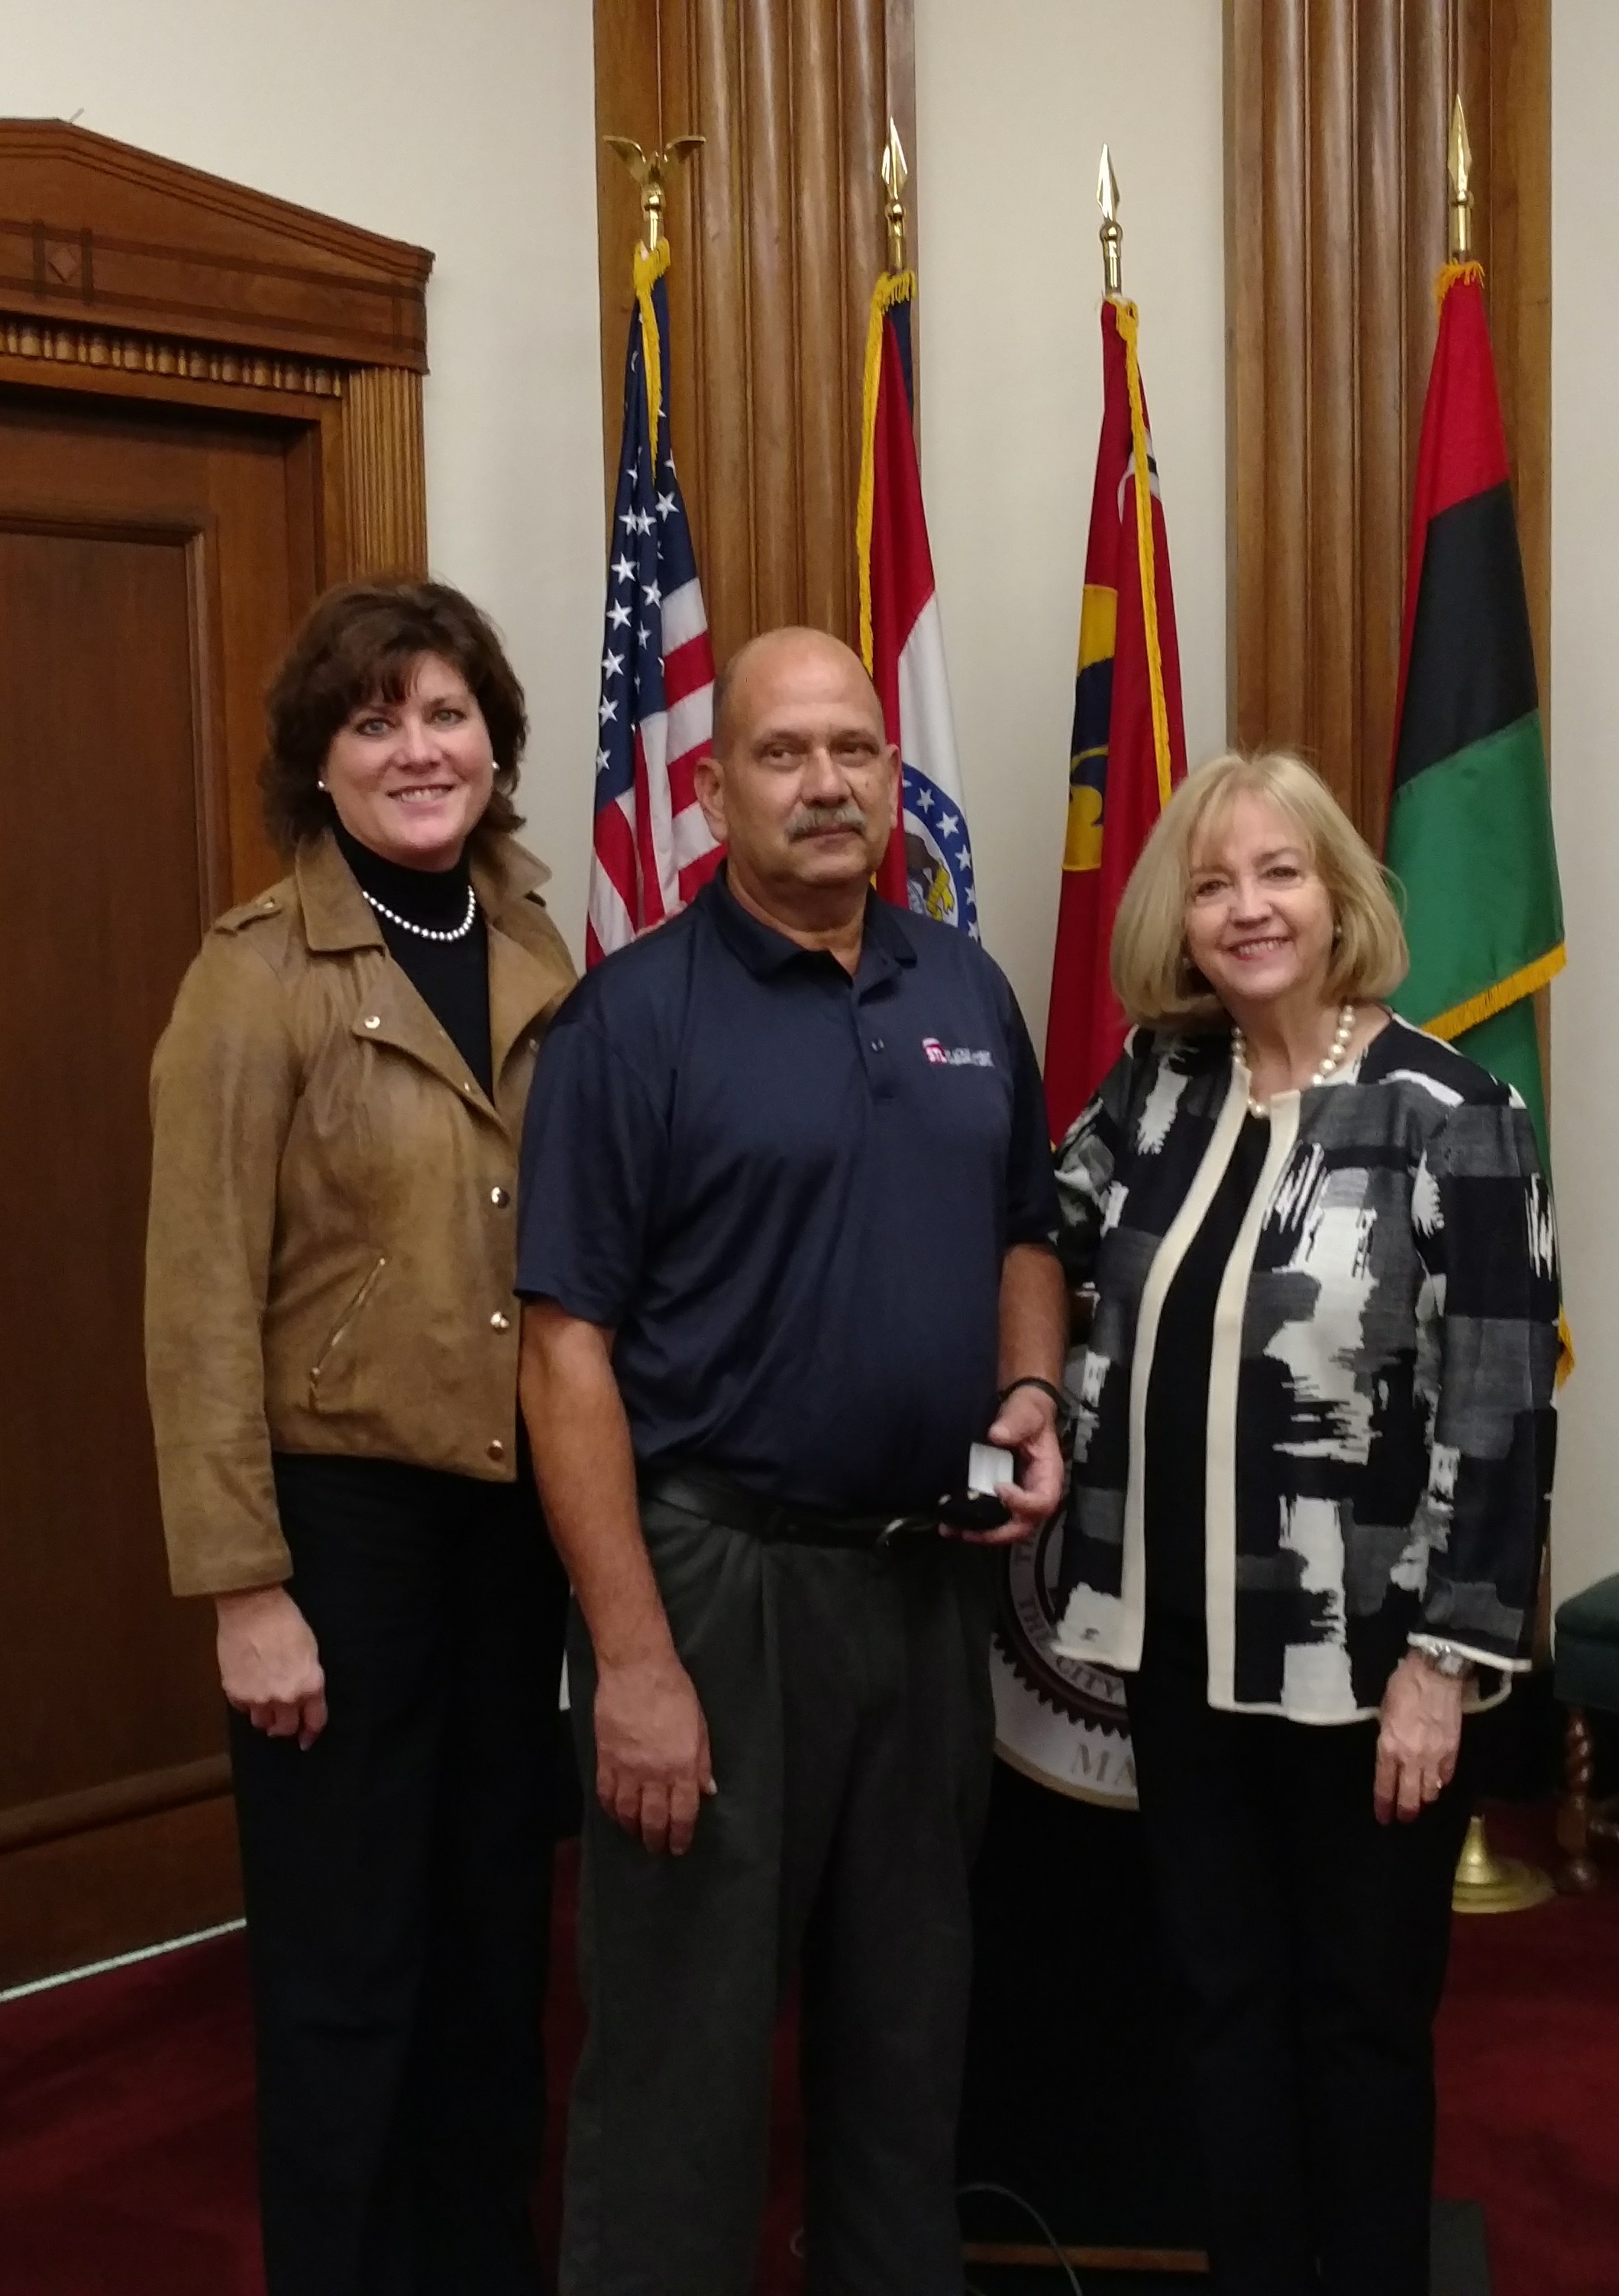 Airport Director Rhonda Hamm-Niebruegge (l) and Mayor Lyda Krewson congratulate Michael Bernich on his 40 years of service with the City of St. Louis